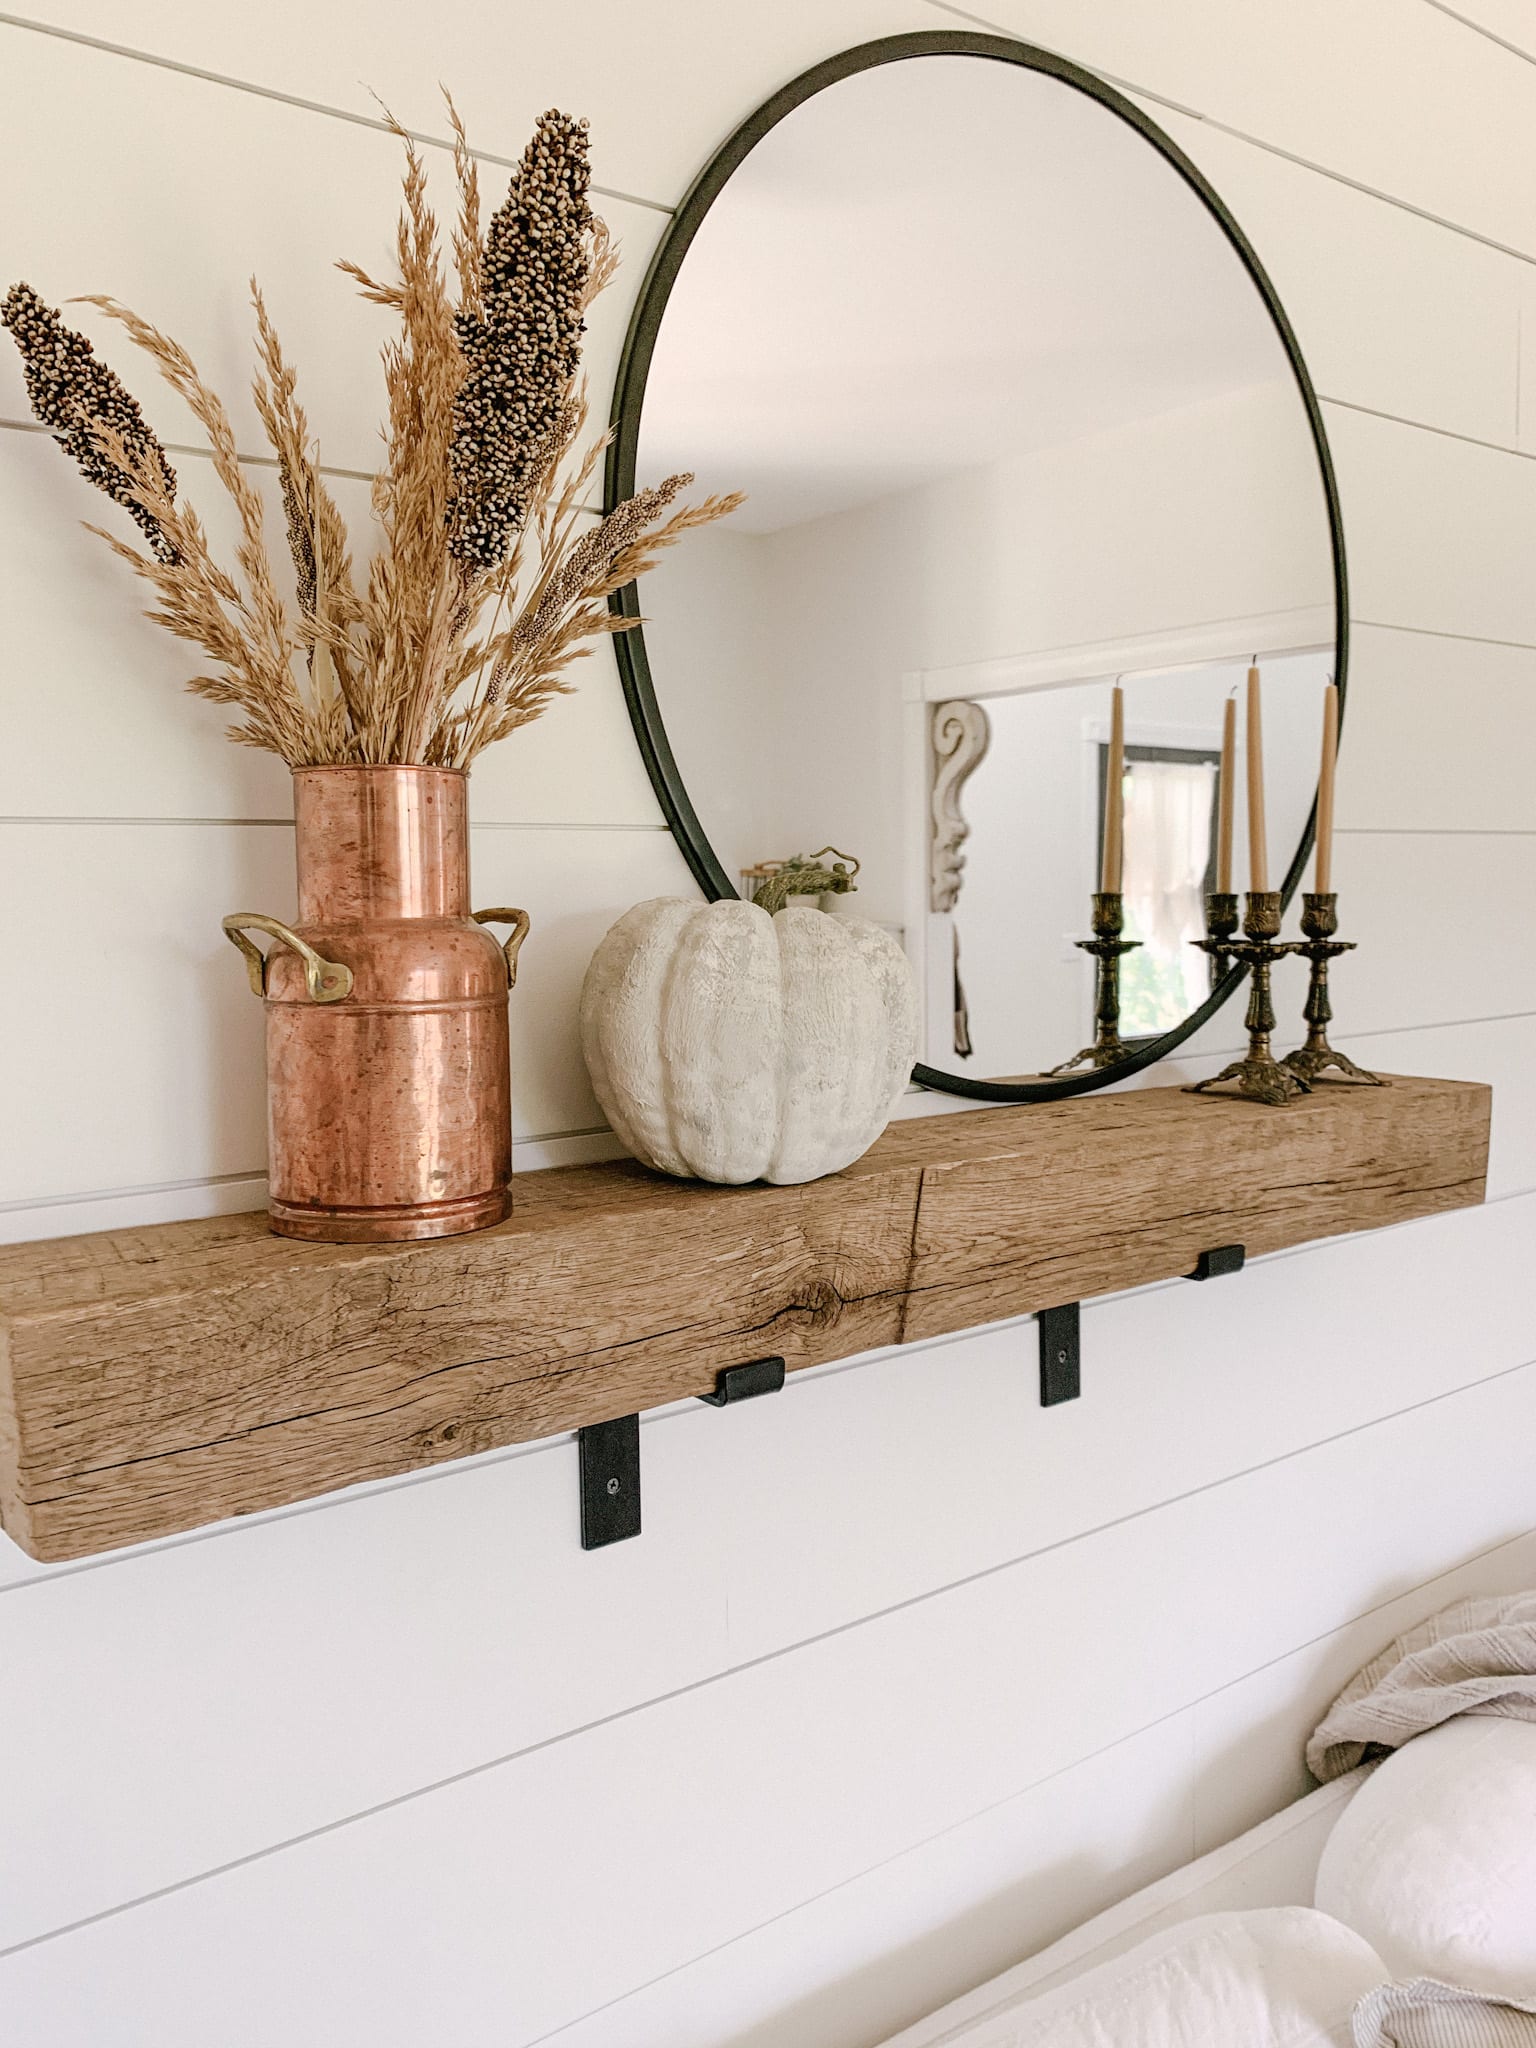 simple mantel decor for fall using pumpkin and oats